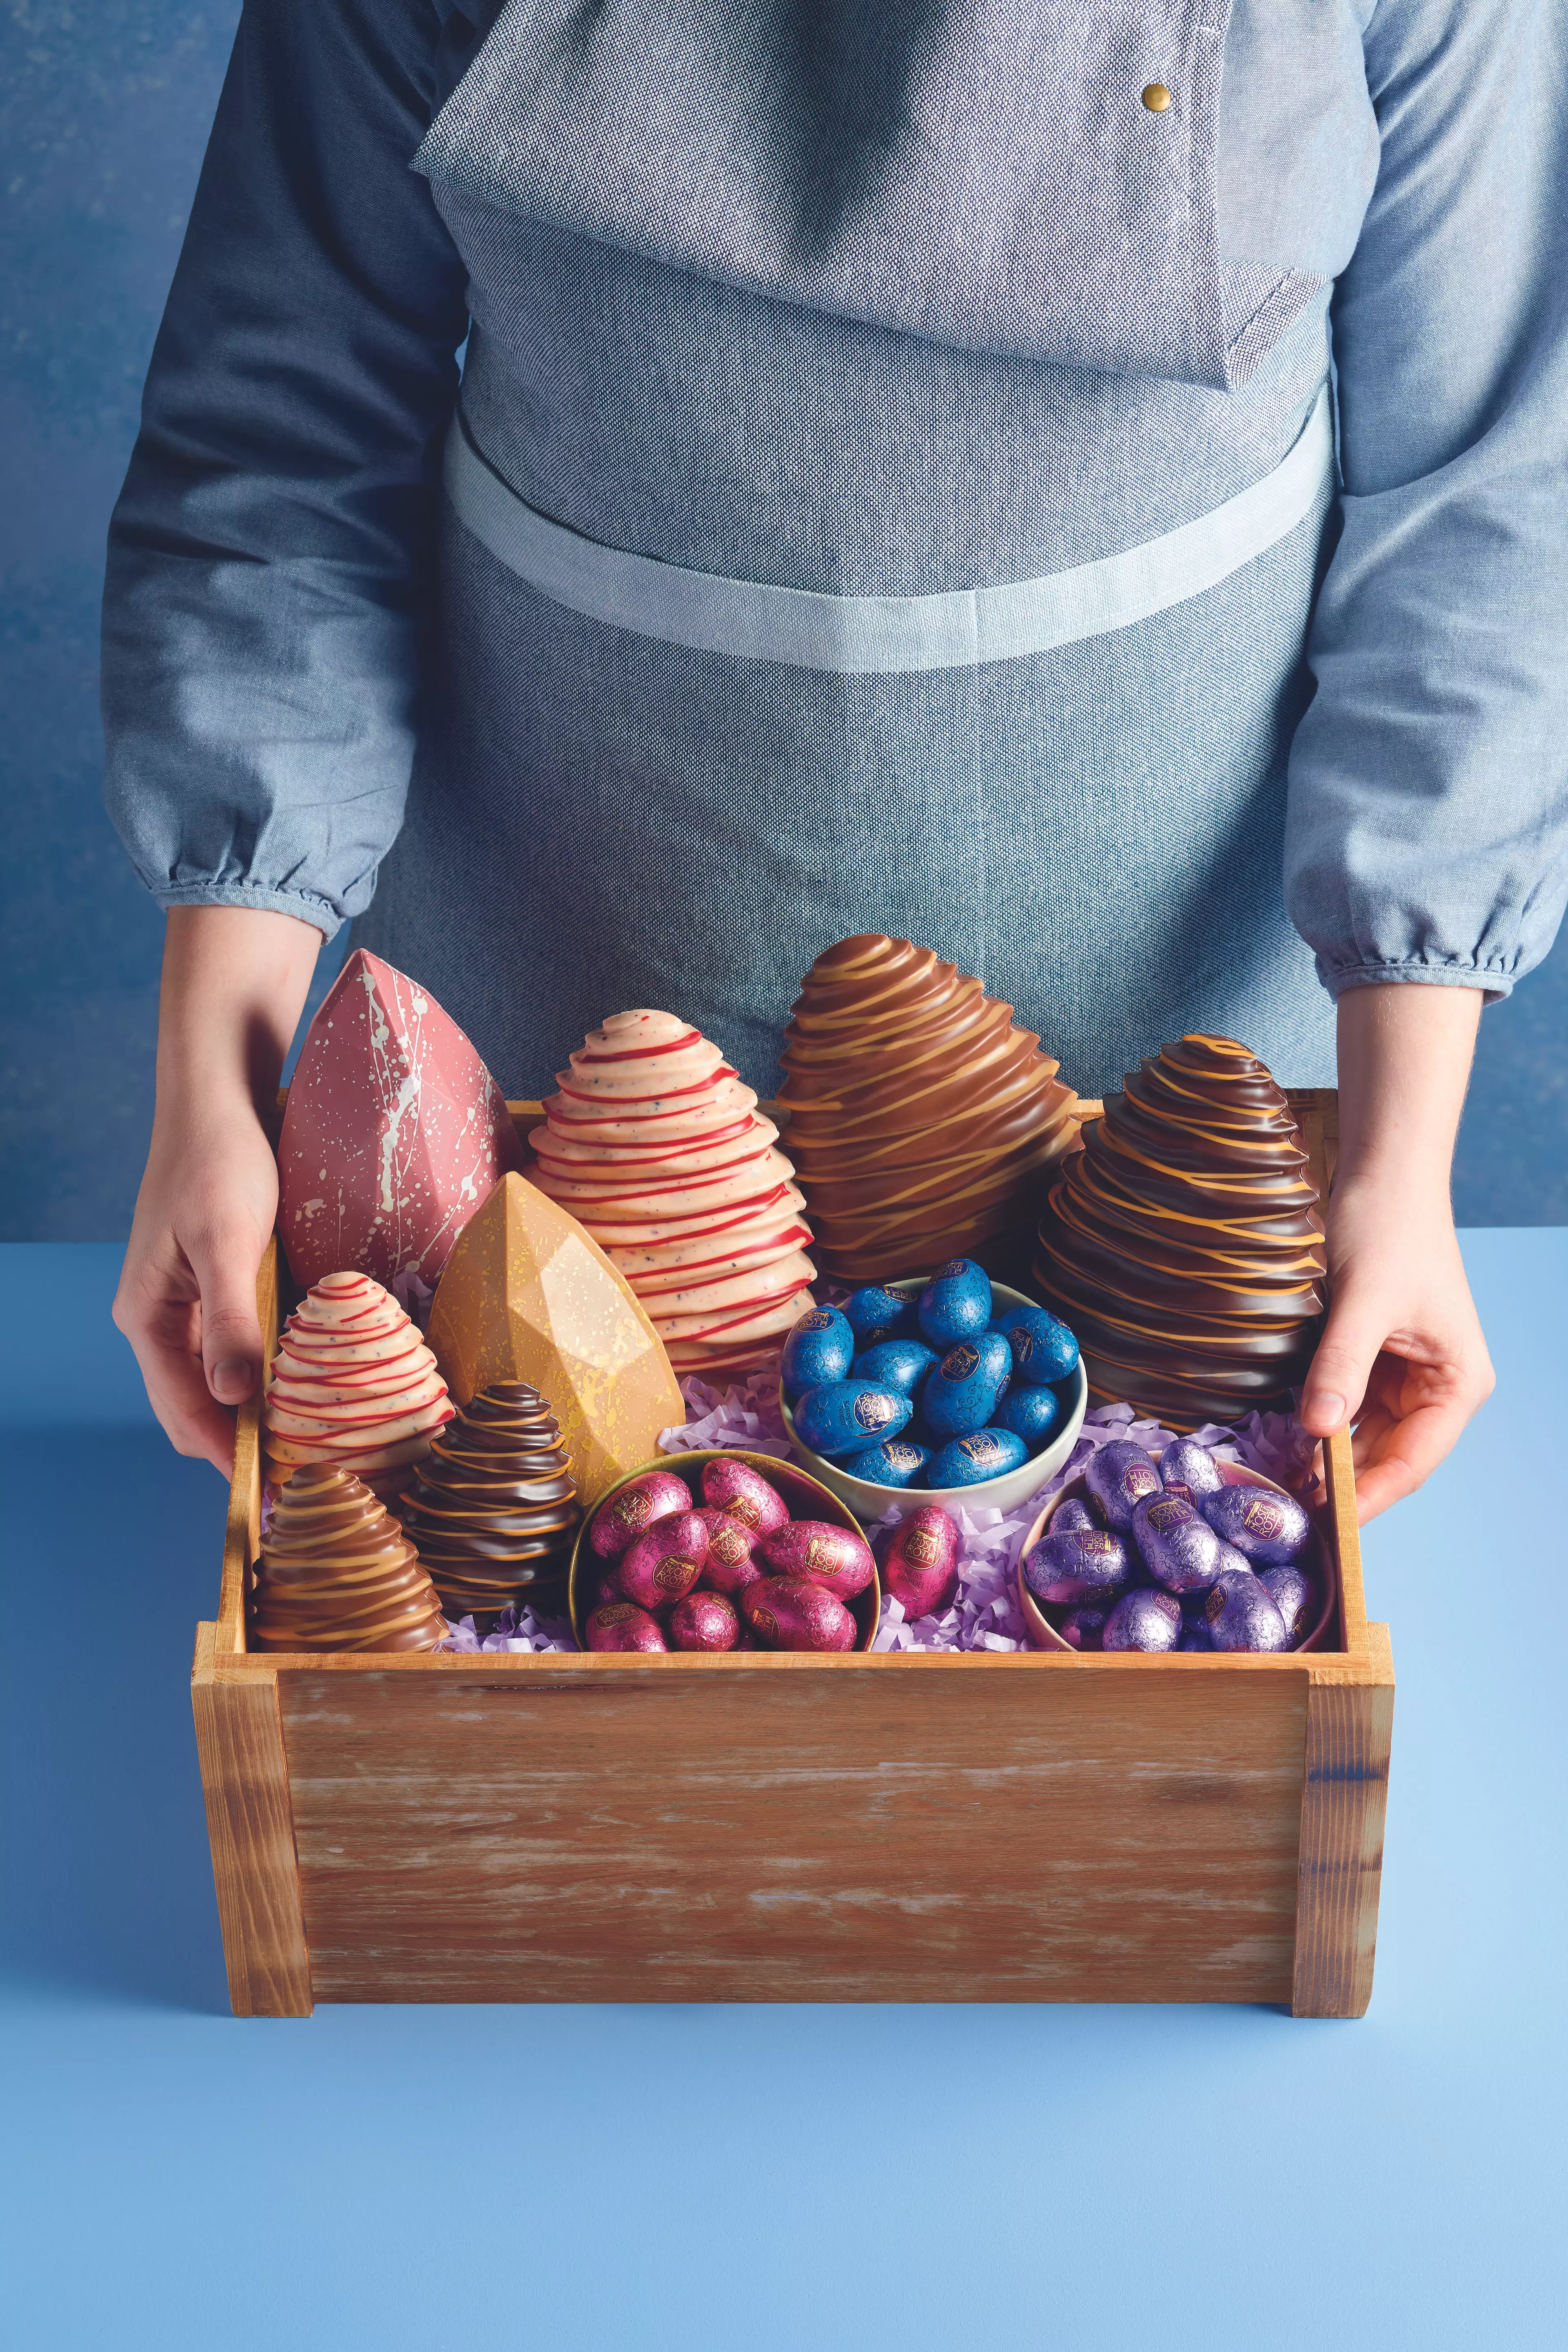 Aldi is recruiting three tasting officers to sample its huge Easter egg range (